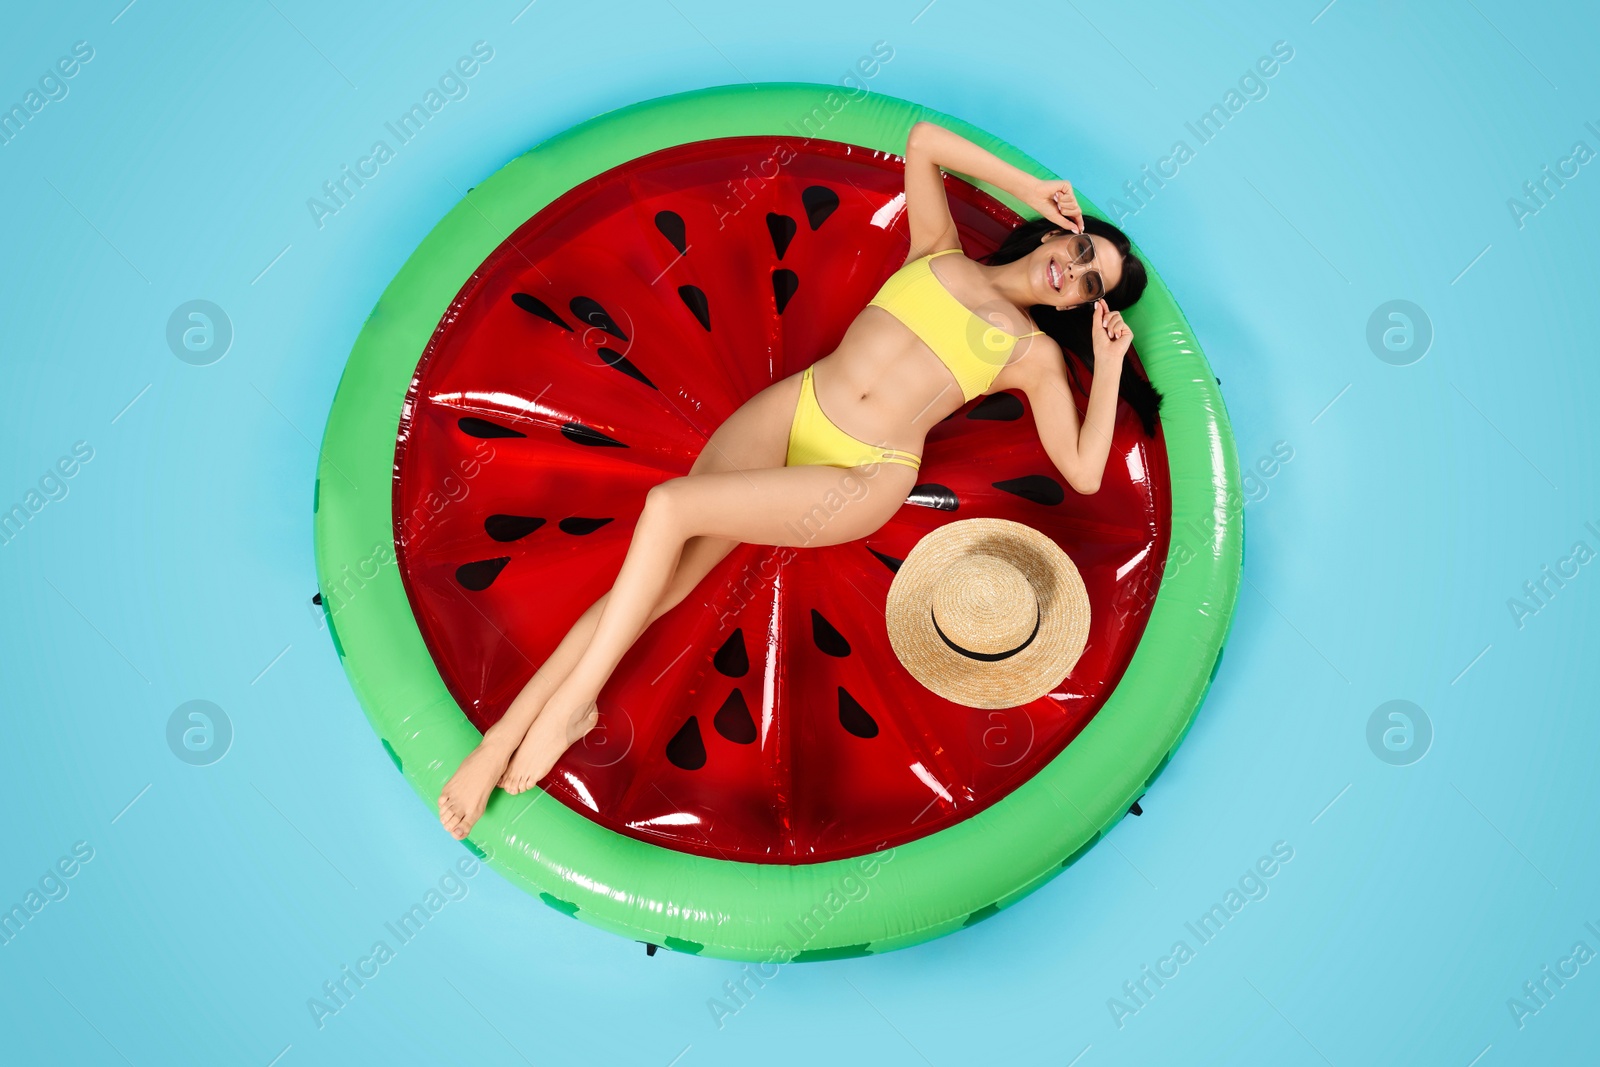 Photo of Young woman with stylish sunglasses on inflatable mattress against light blue background, above view